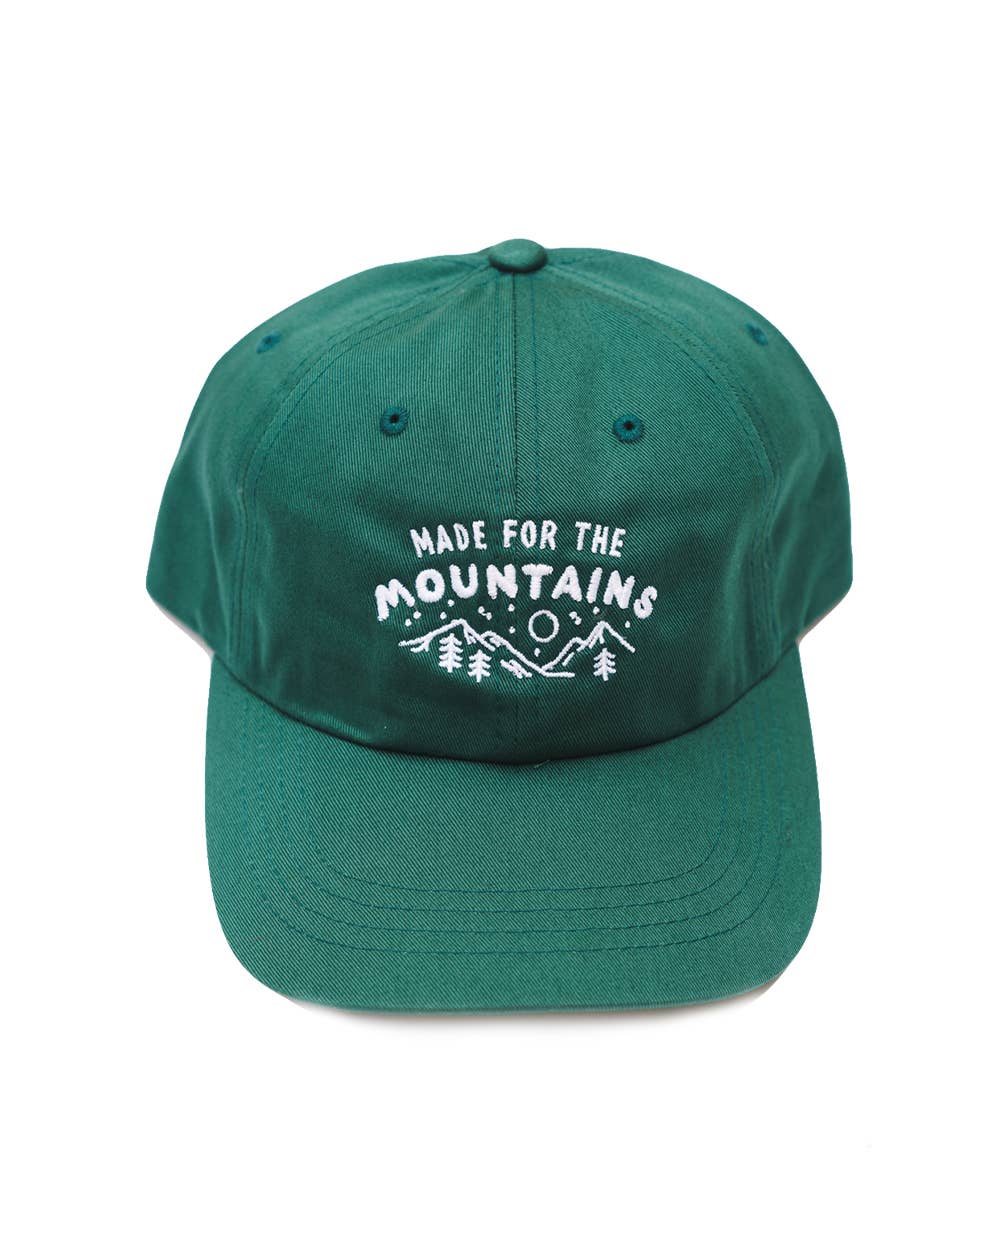 Green Made for the Mountains dad hat by Keep Nature Wild